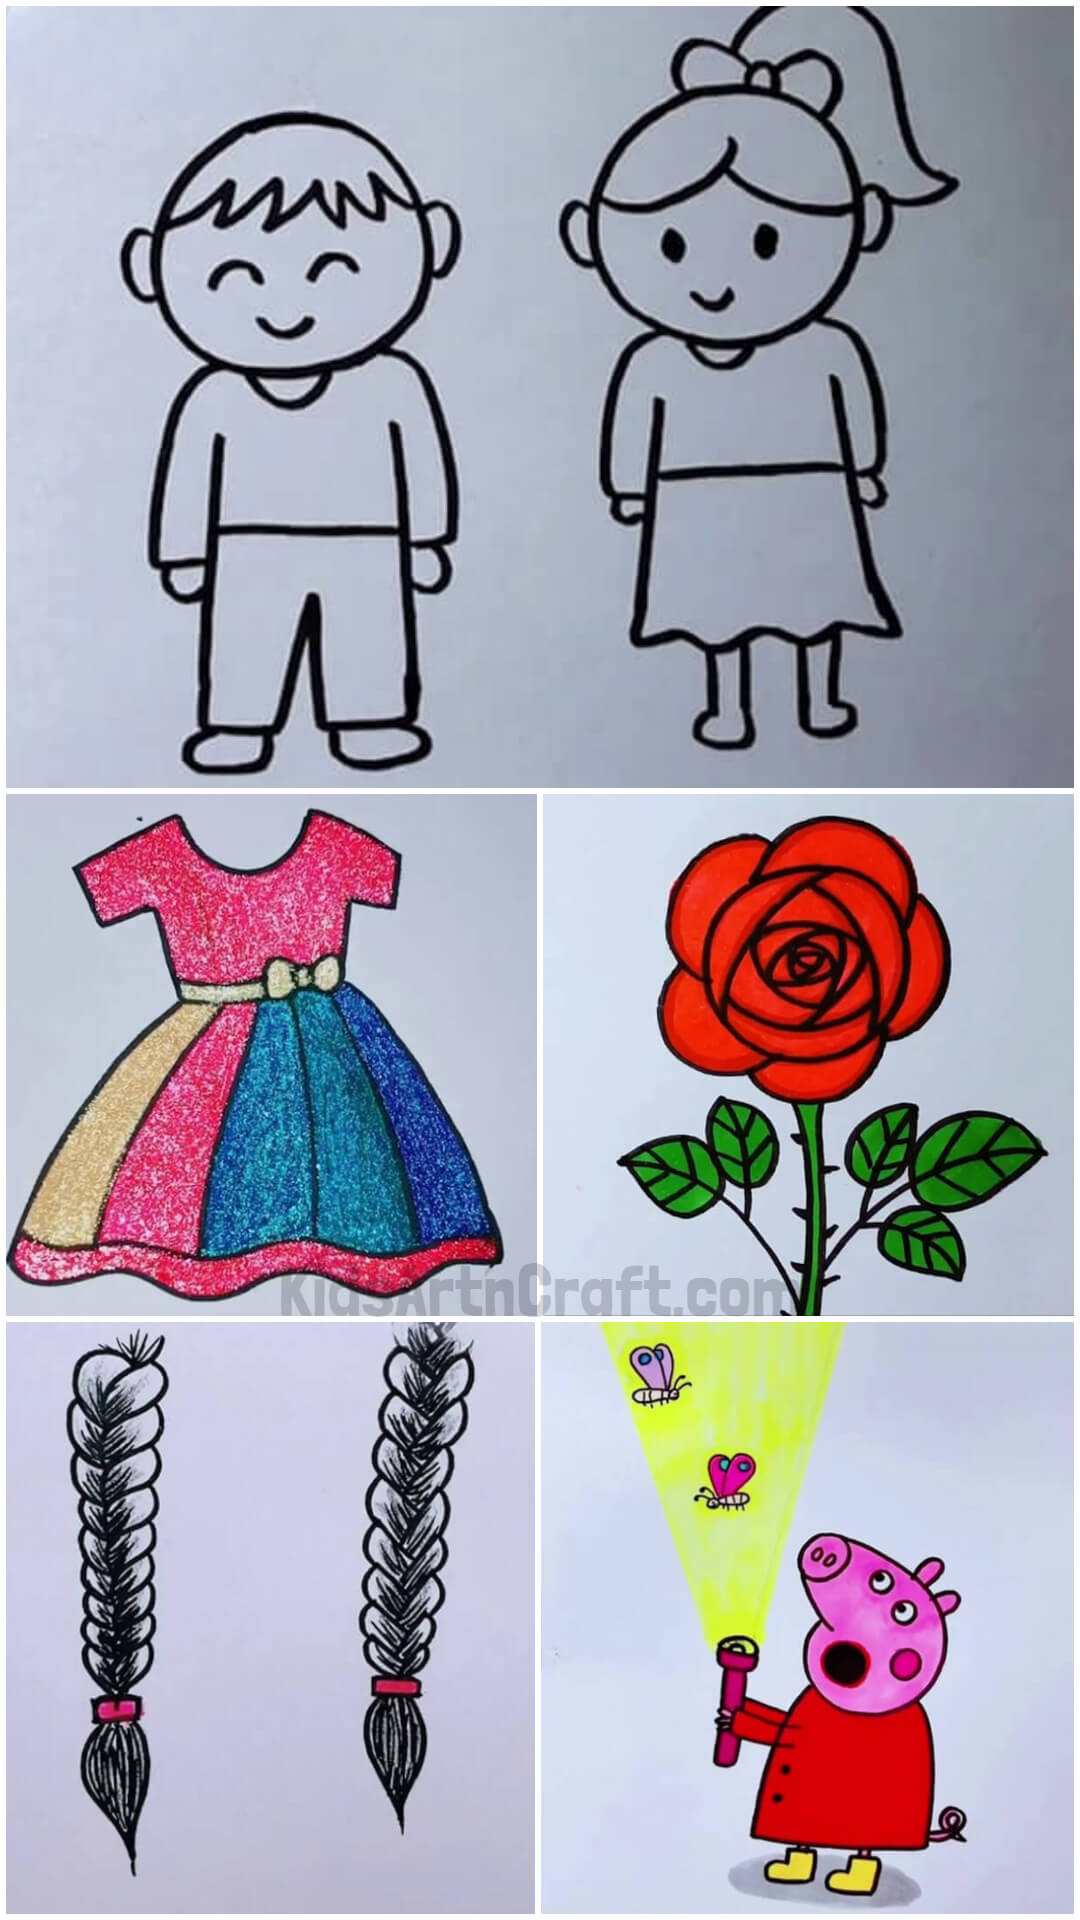 Pictures for 6-year-olds - Simple drawings for 6-year-Olds